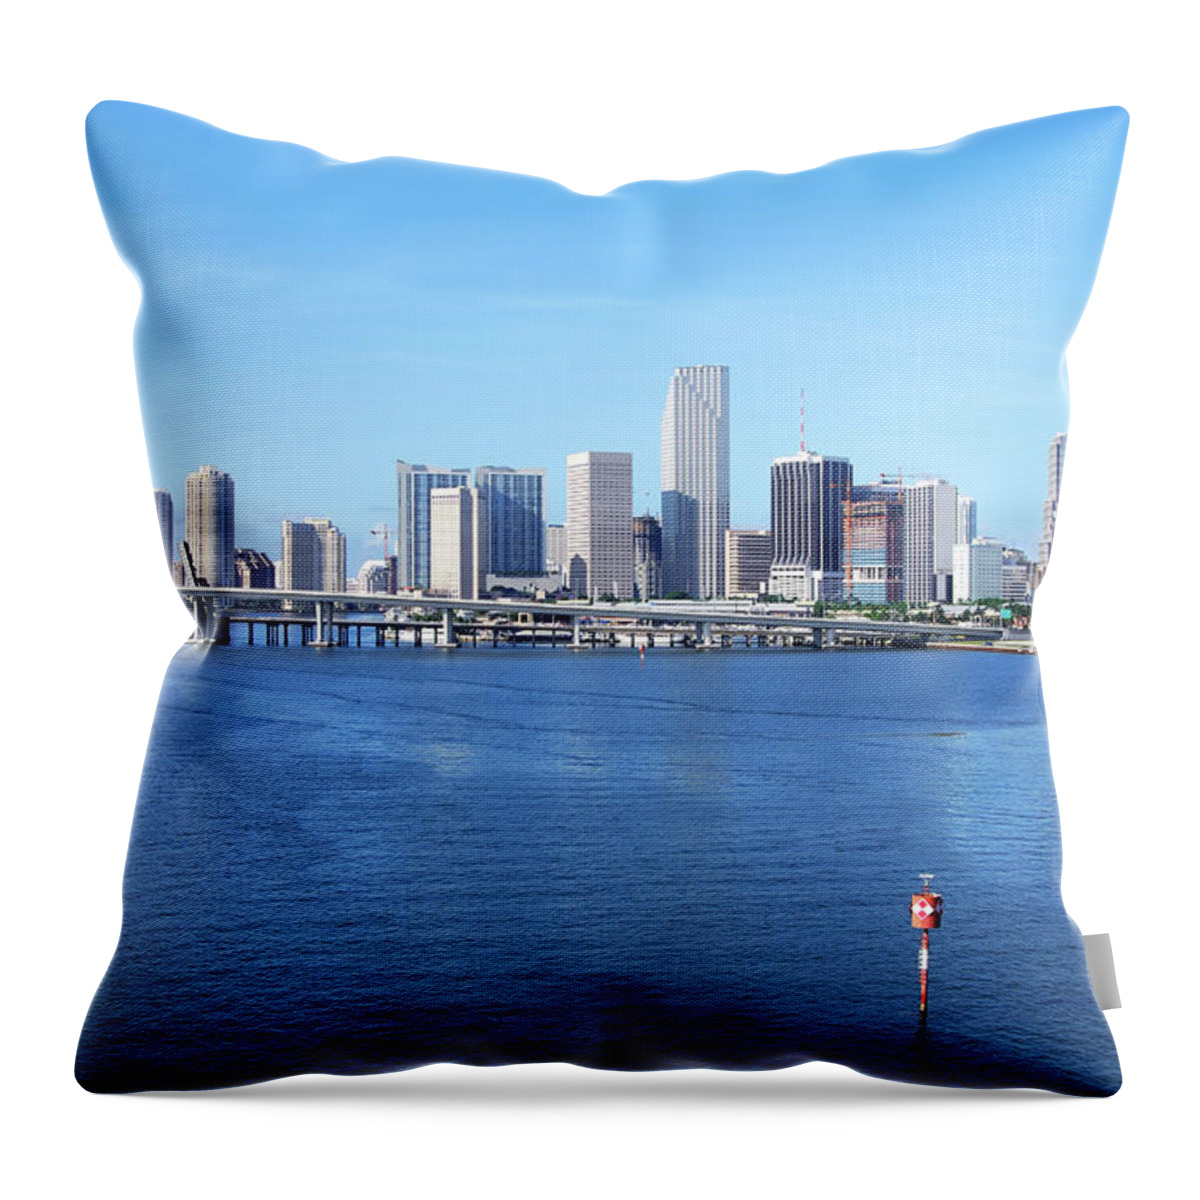 Built Structure Throw Pillow featuring the photograph Miami Skyline by Chang